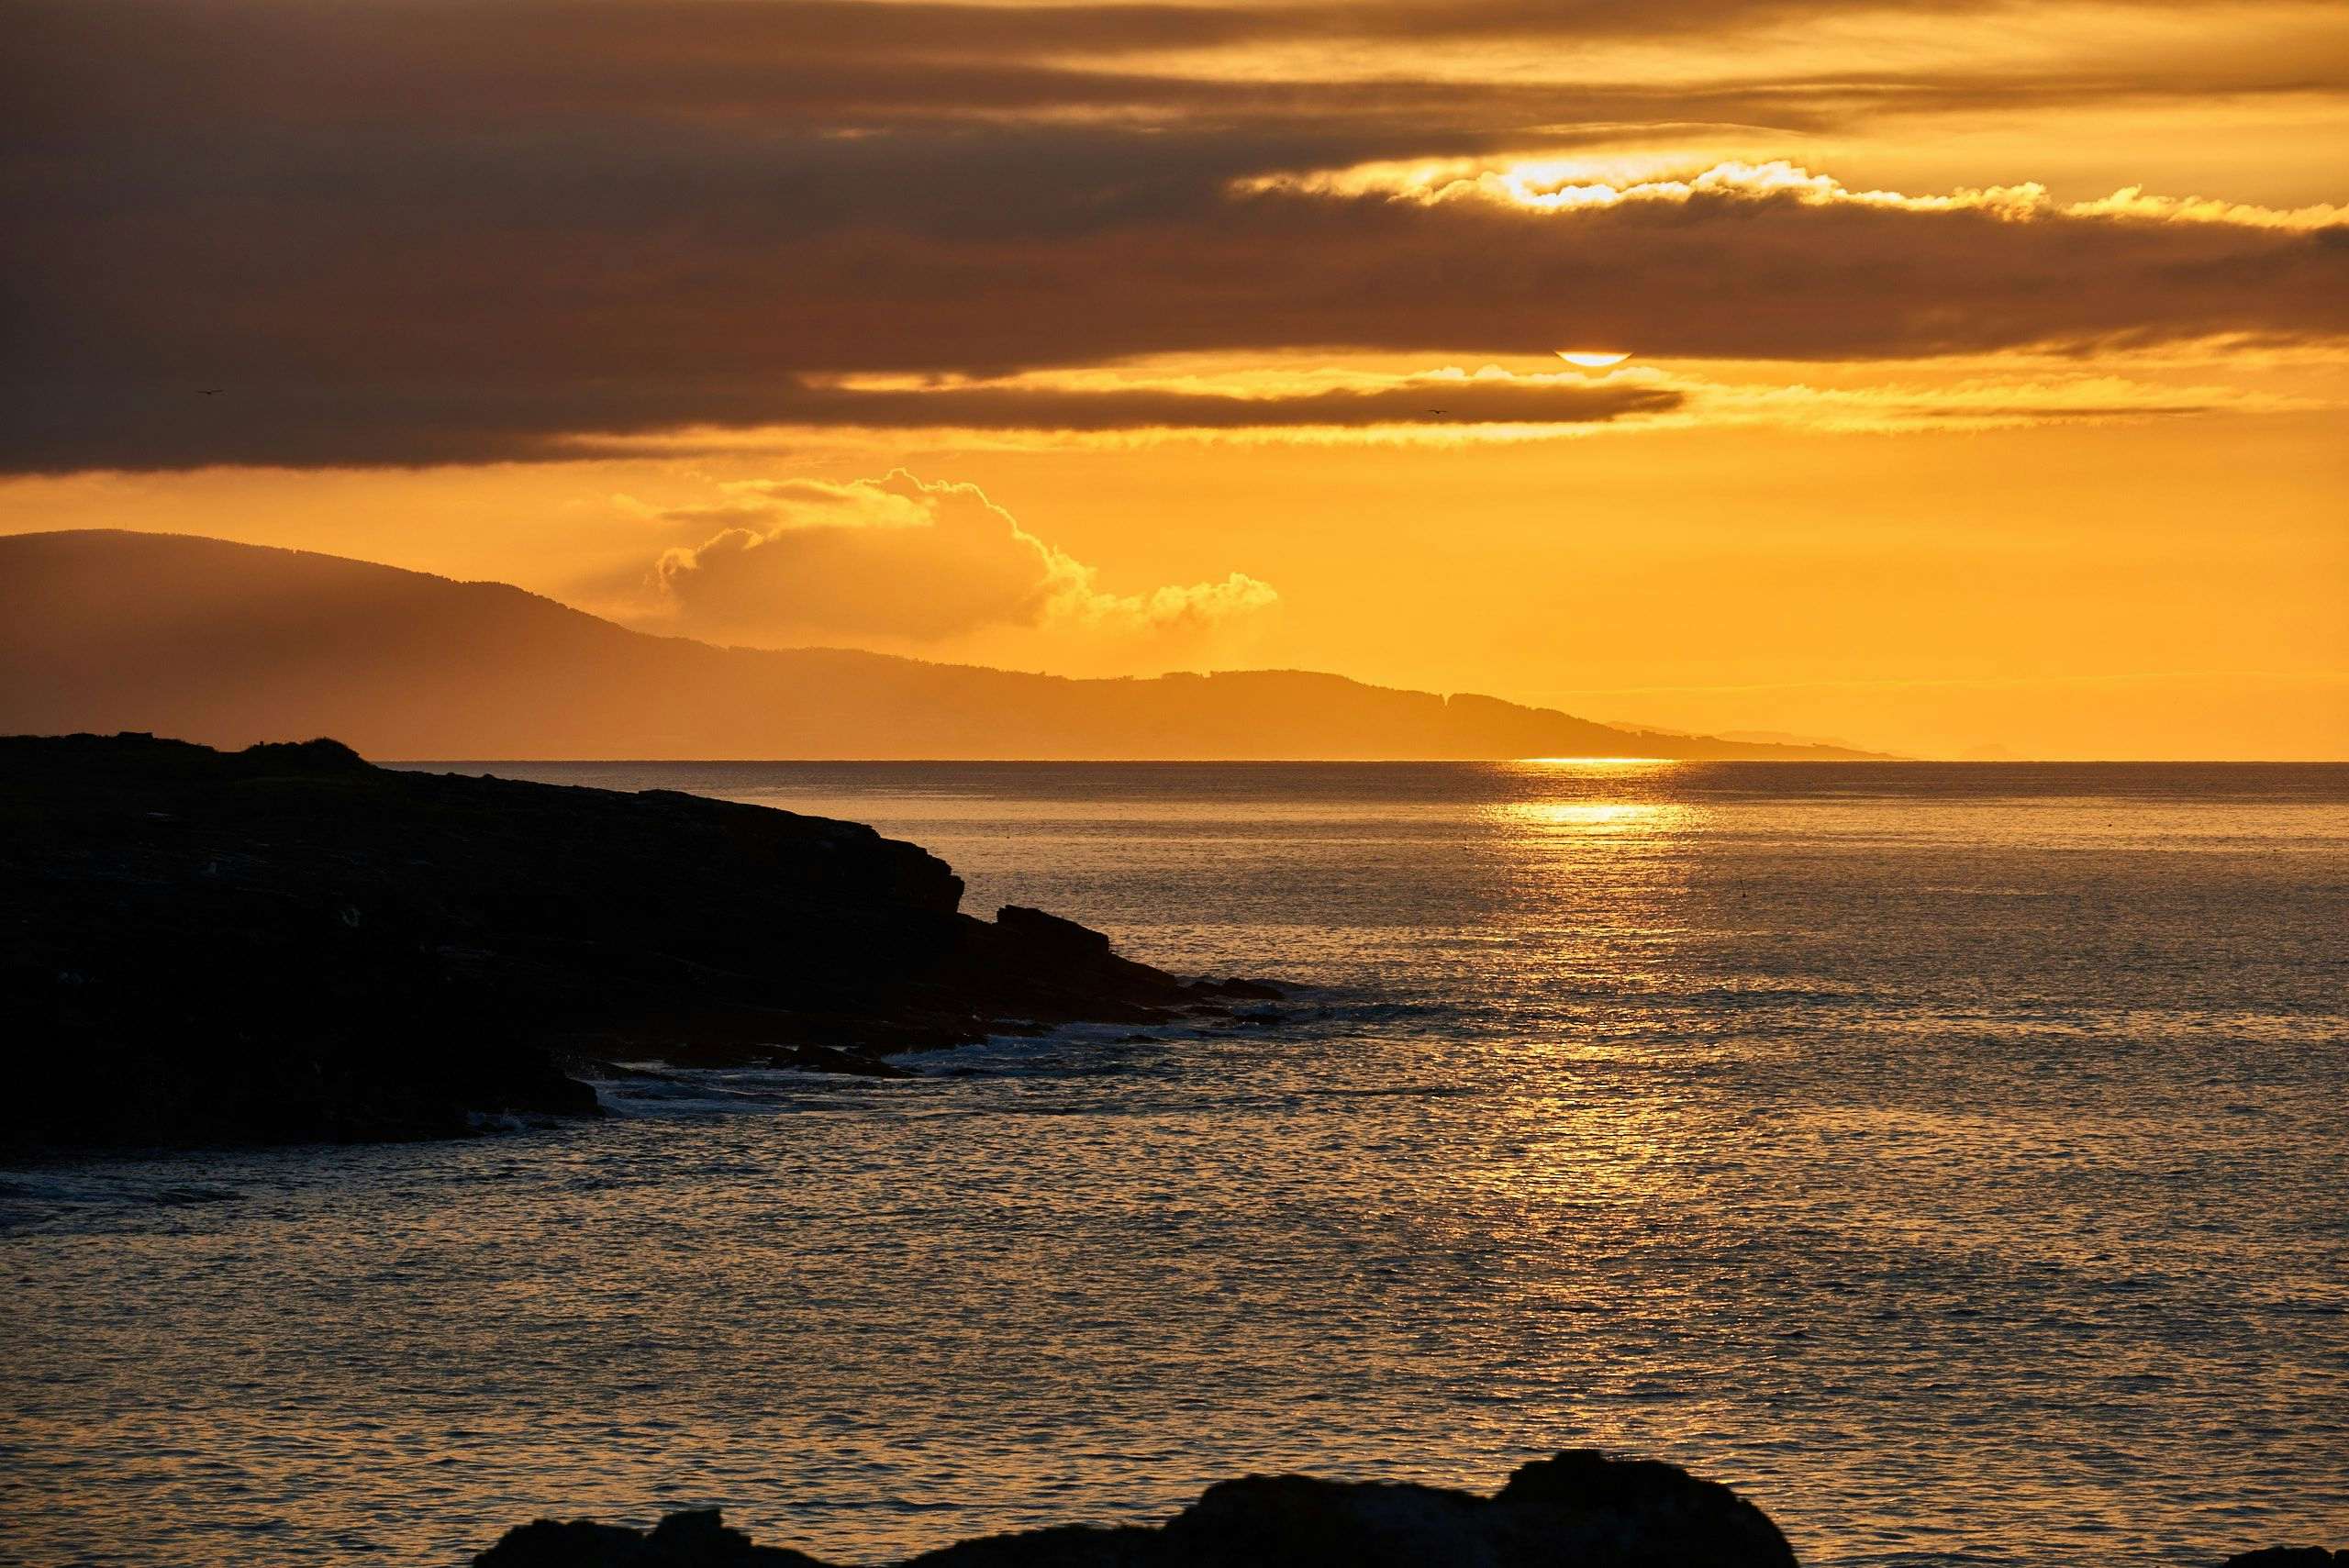 Sunset over Renlo in Galicia. Photography by Xavier Wendling.